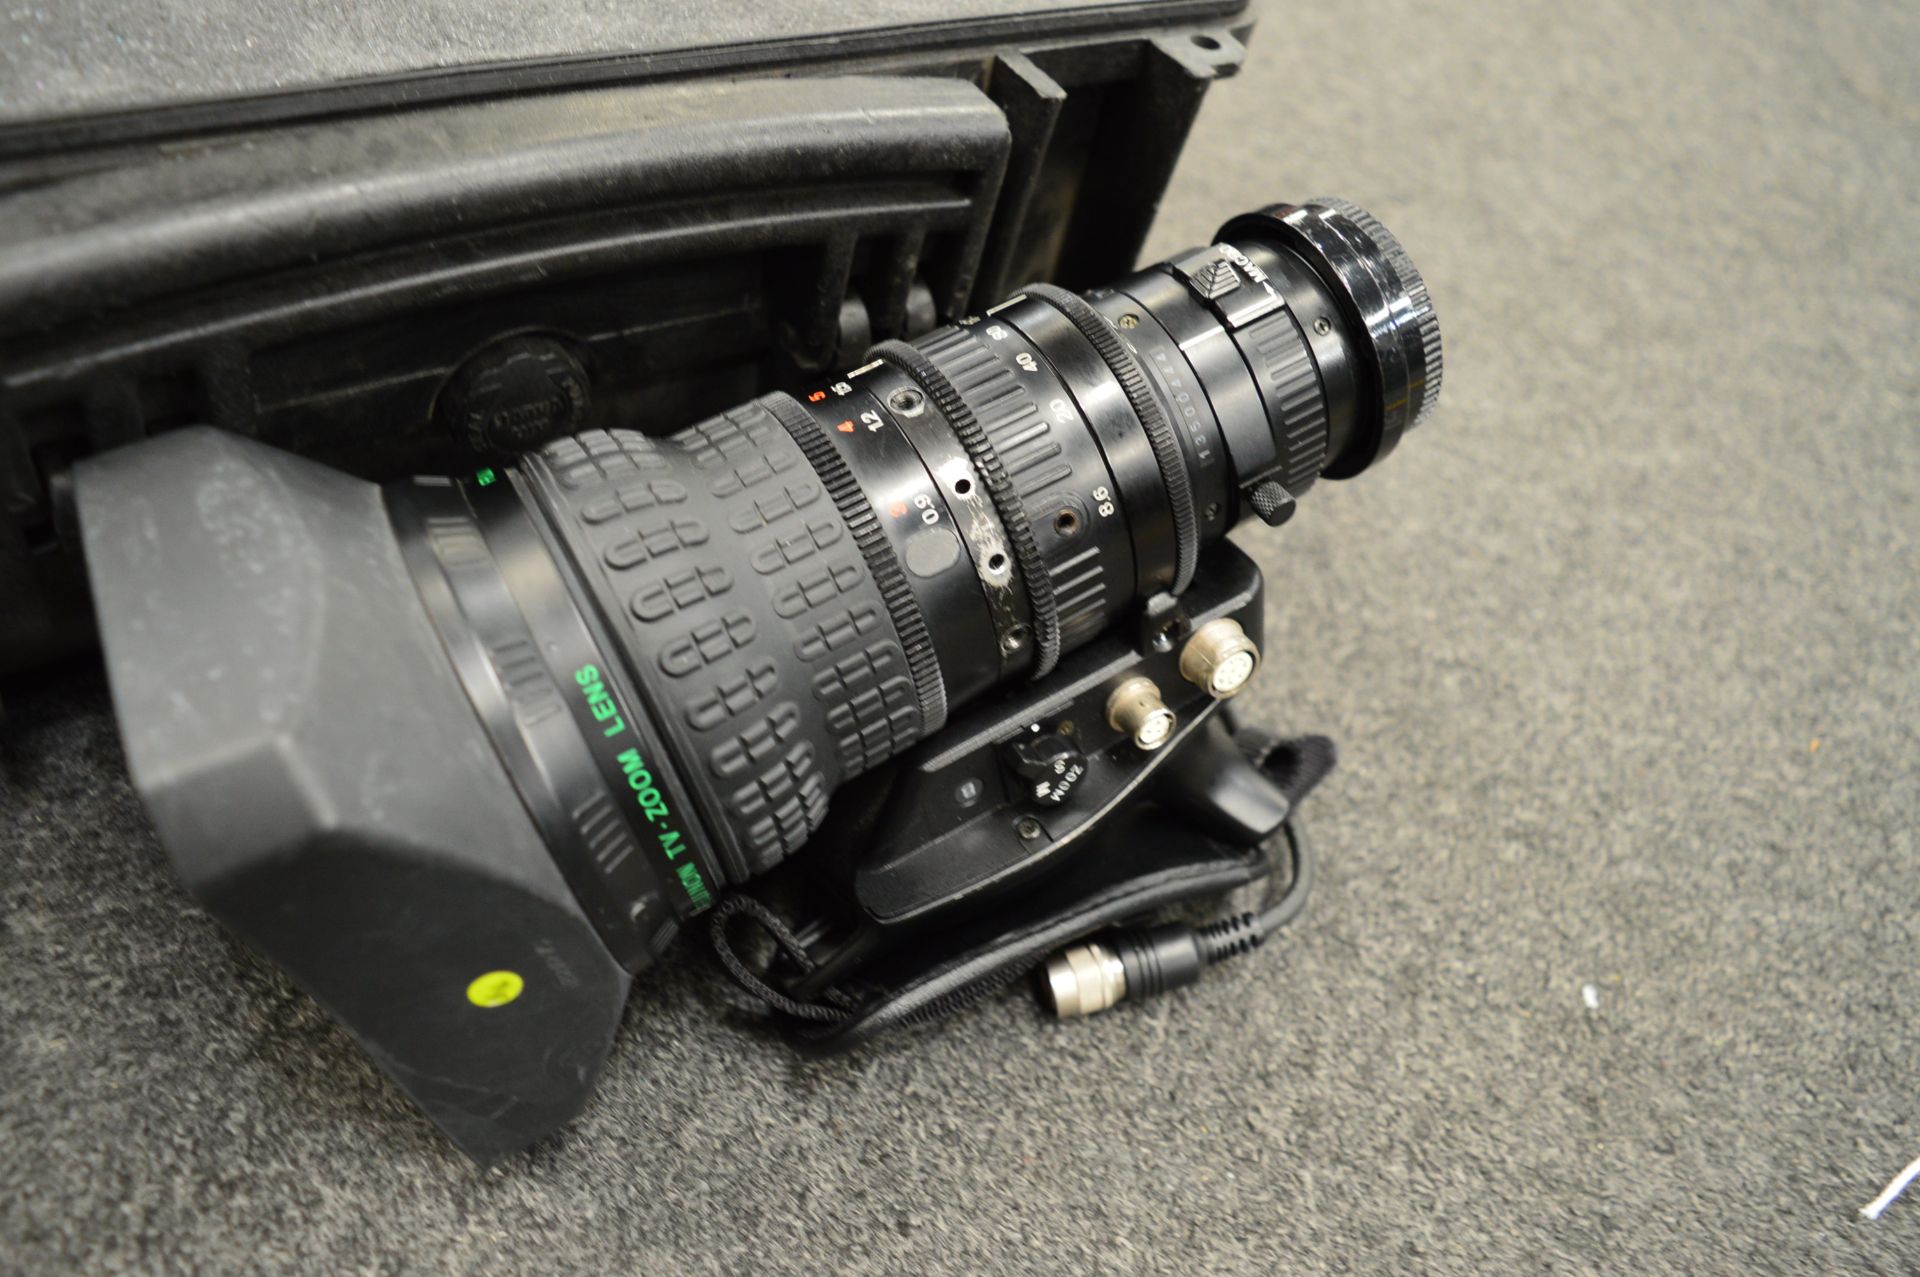 Fujinon, A20 x 8.6BRM-SD 1:1.8/8.6-172mm zoom lens - Image 2 of 3